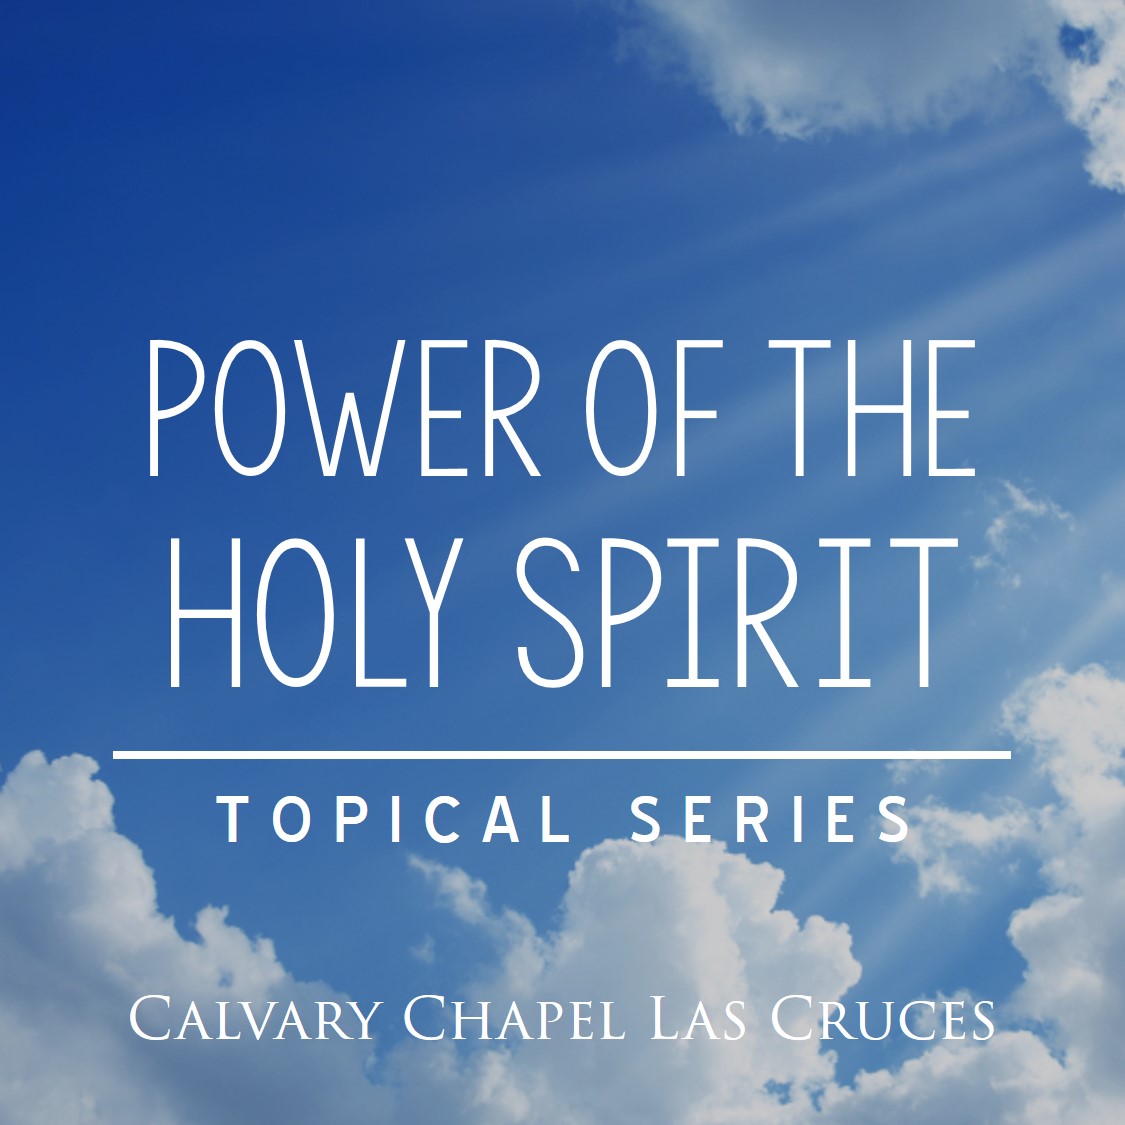 The Power of the Holy Spirit, Part 7